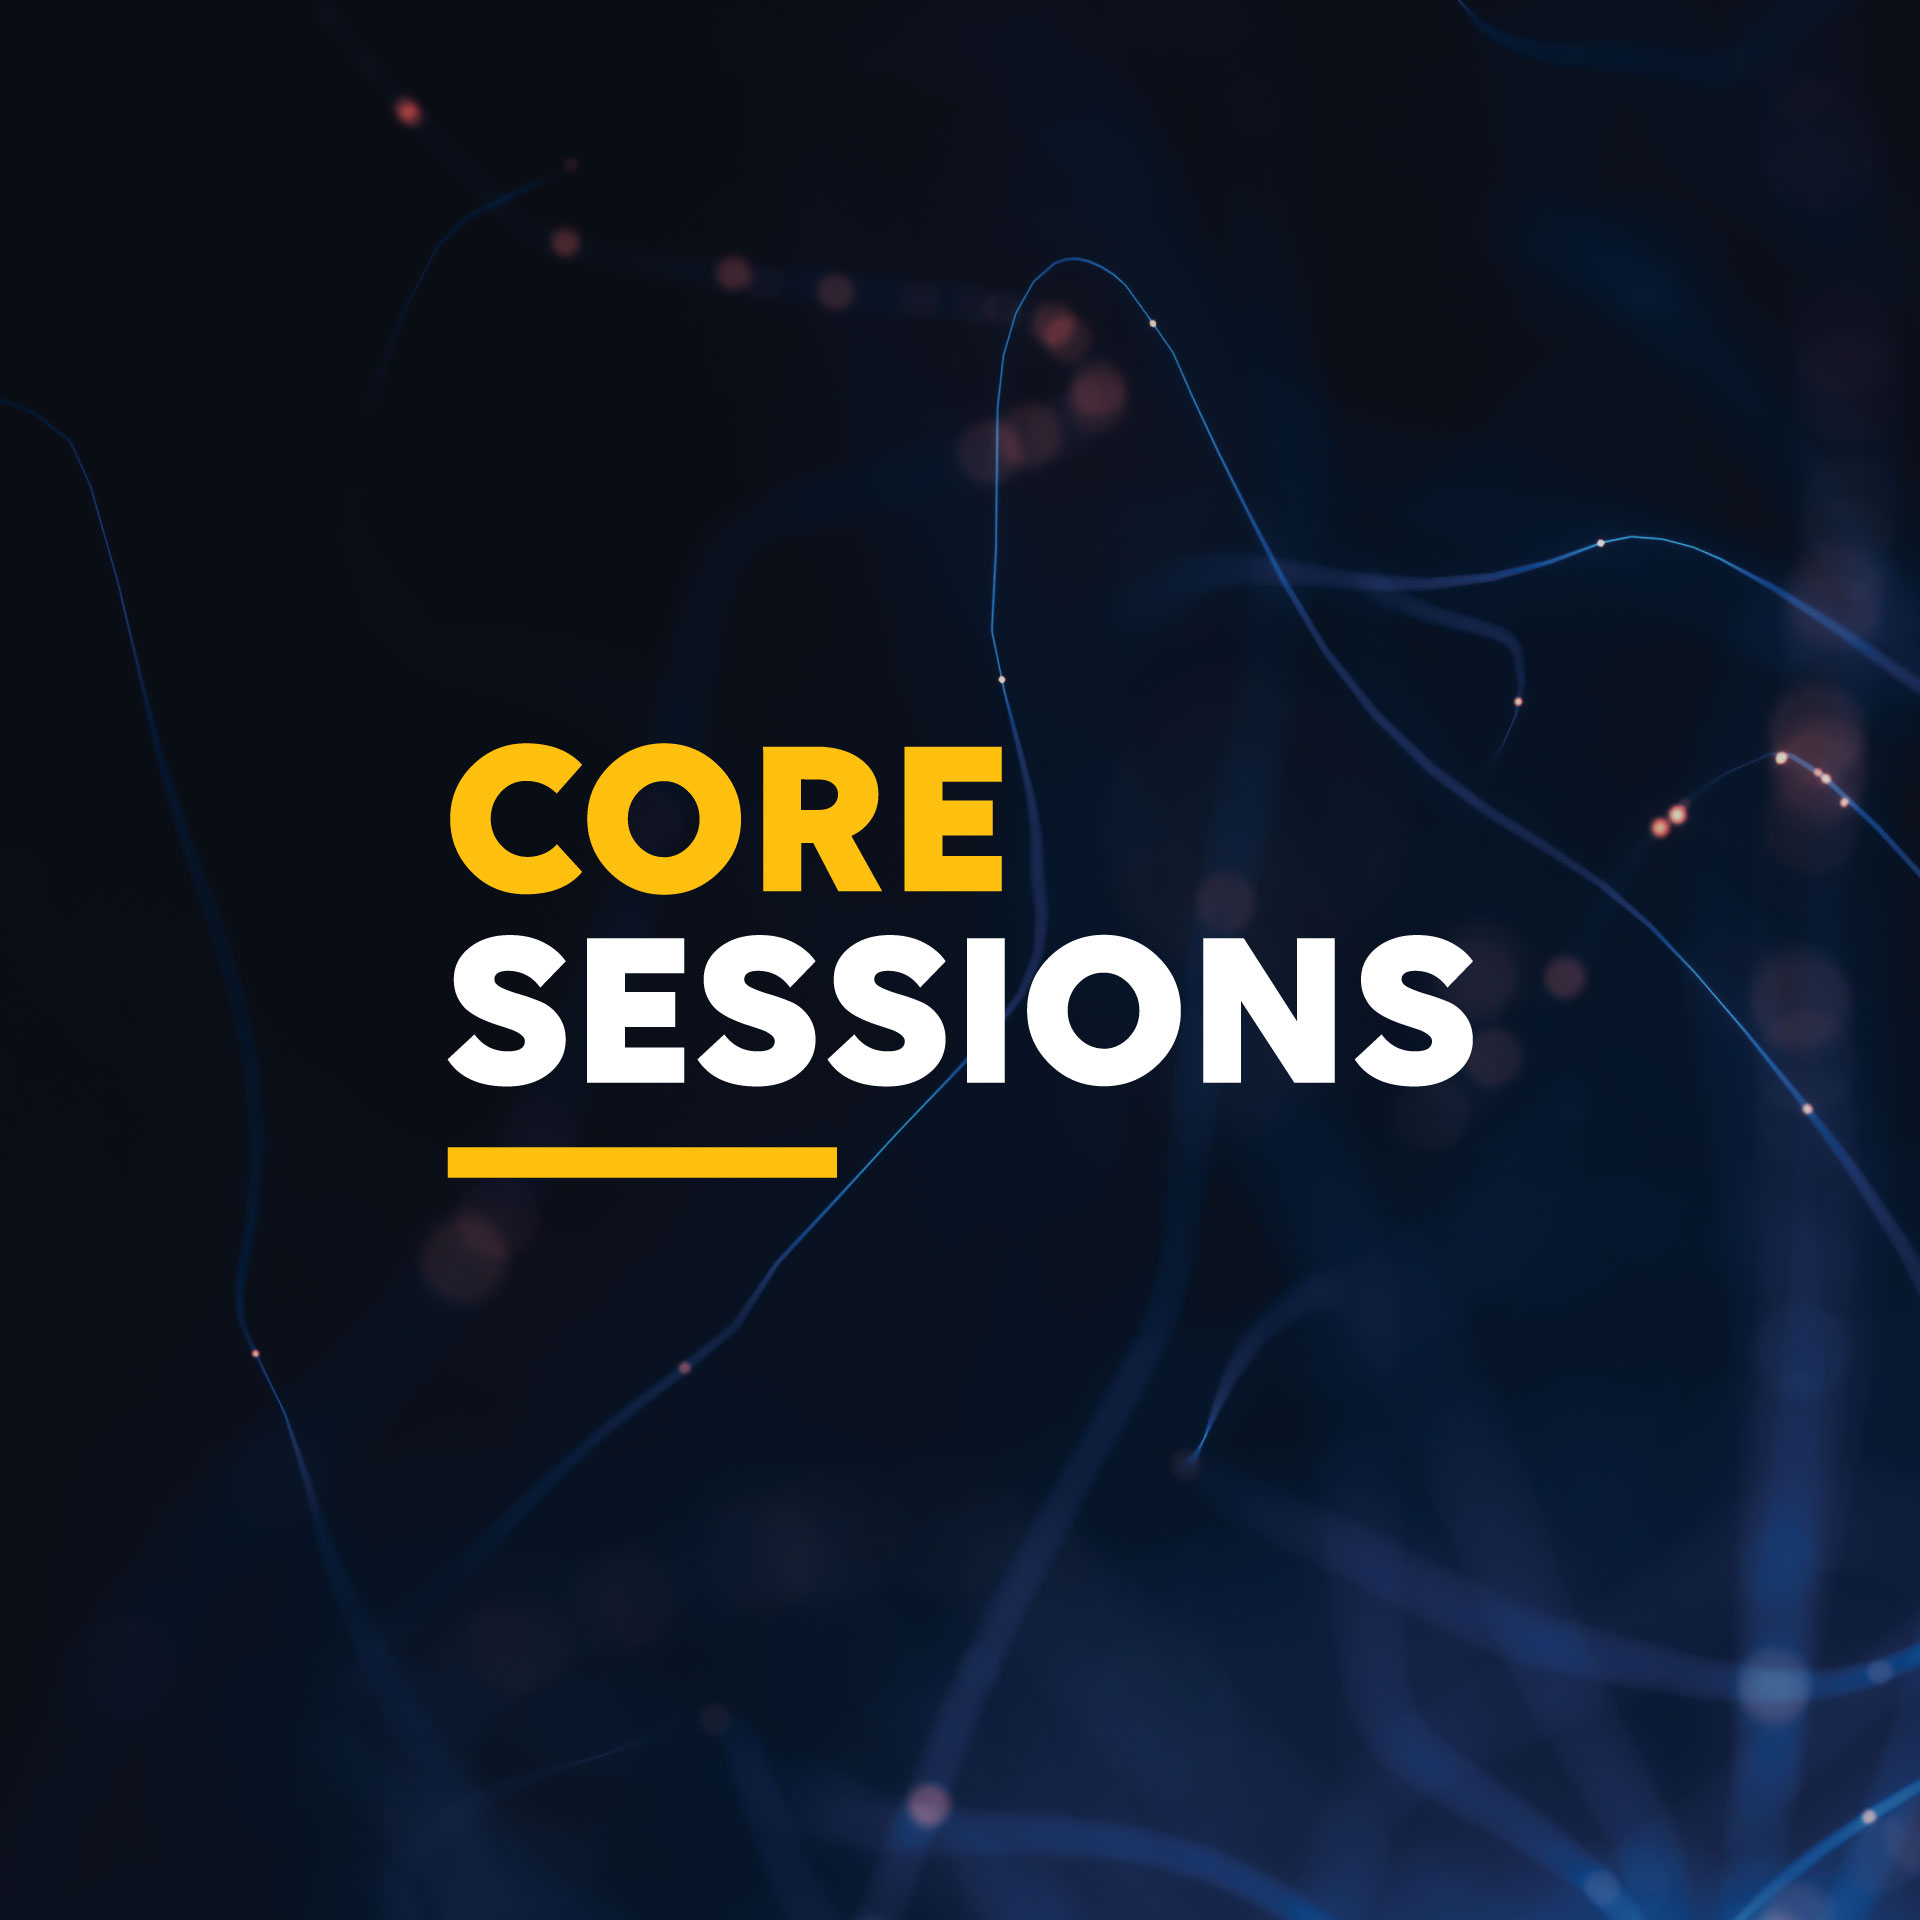 CORE Sessions